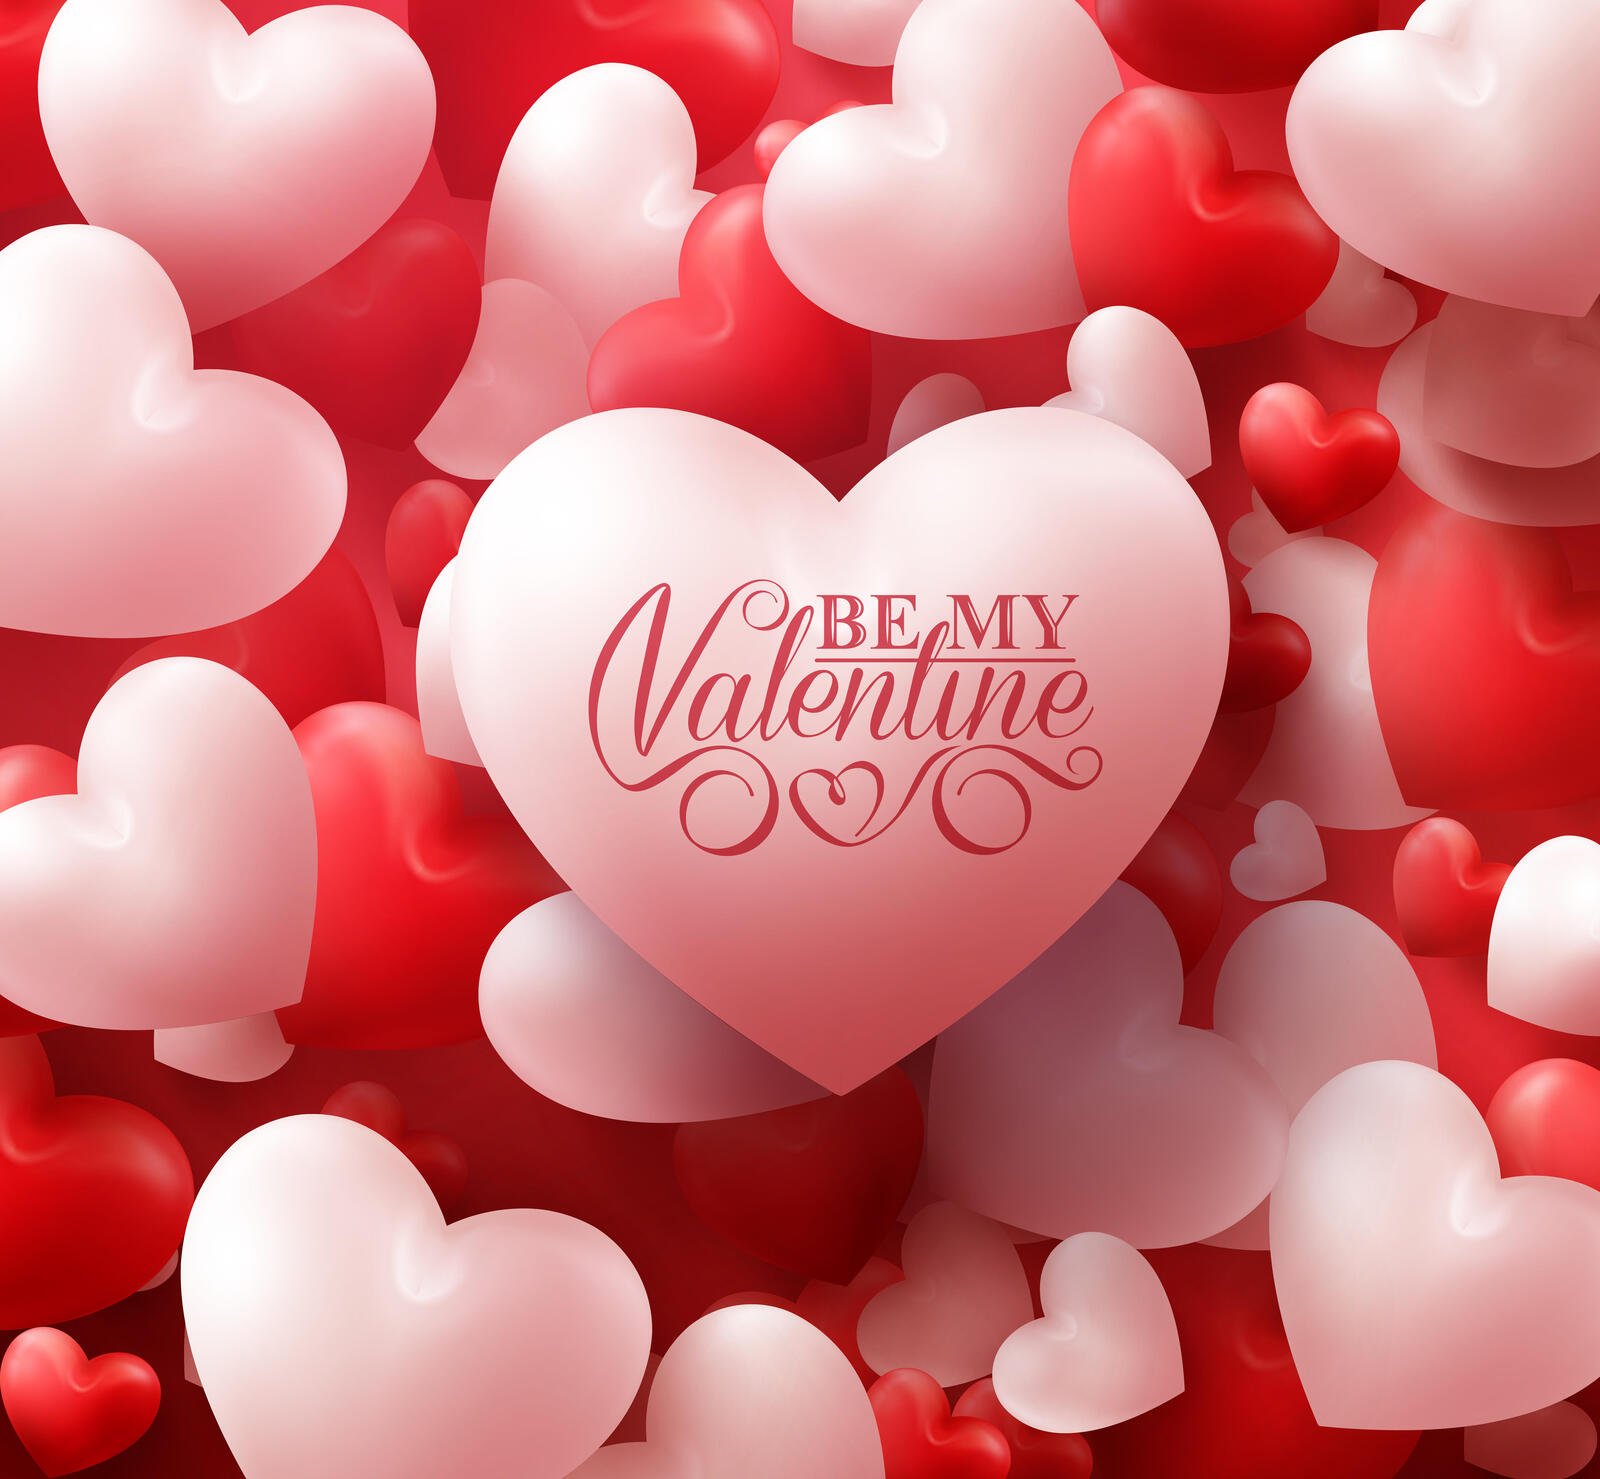 Wallpapers text a day of lovers Valentine day on the desktop